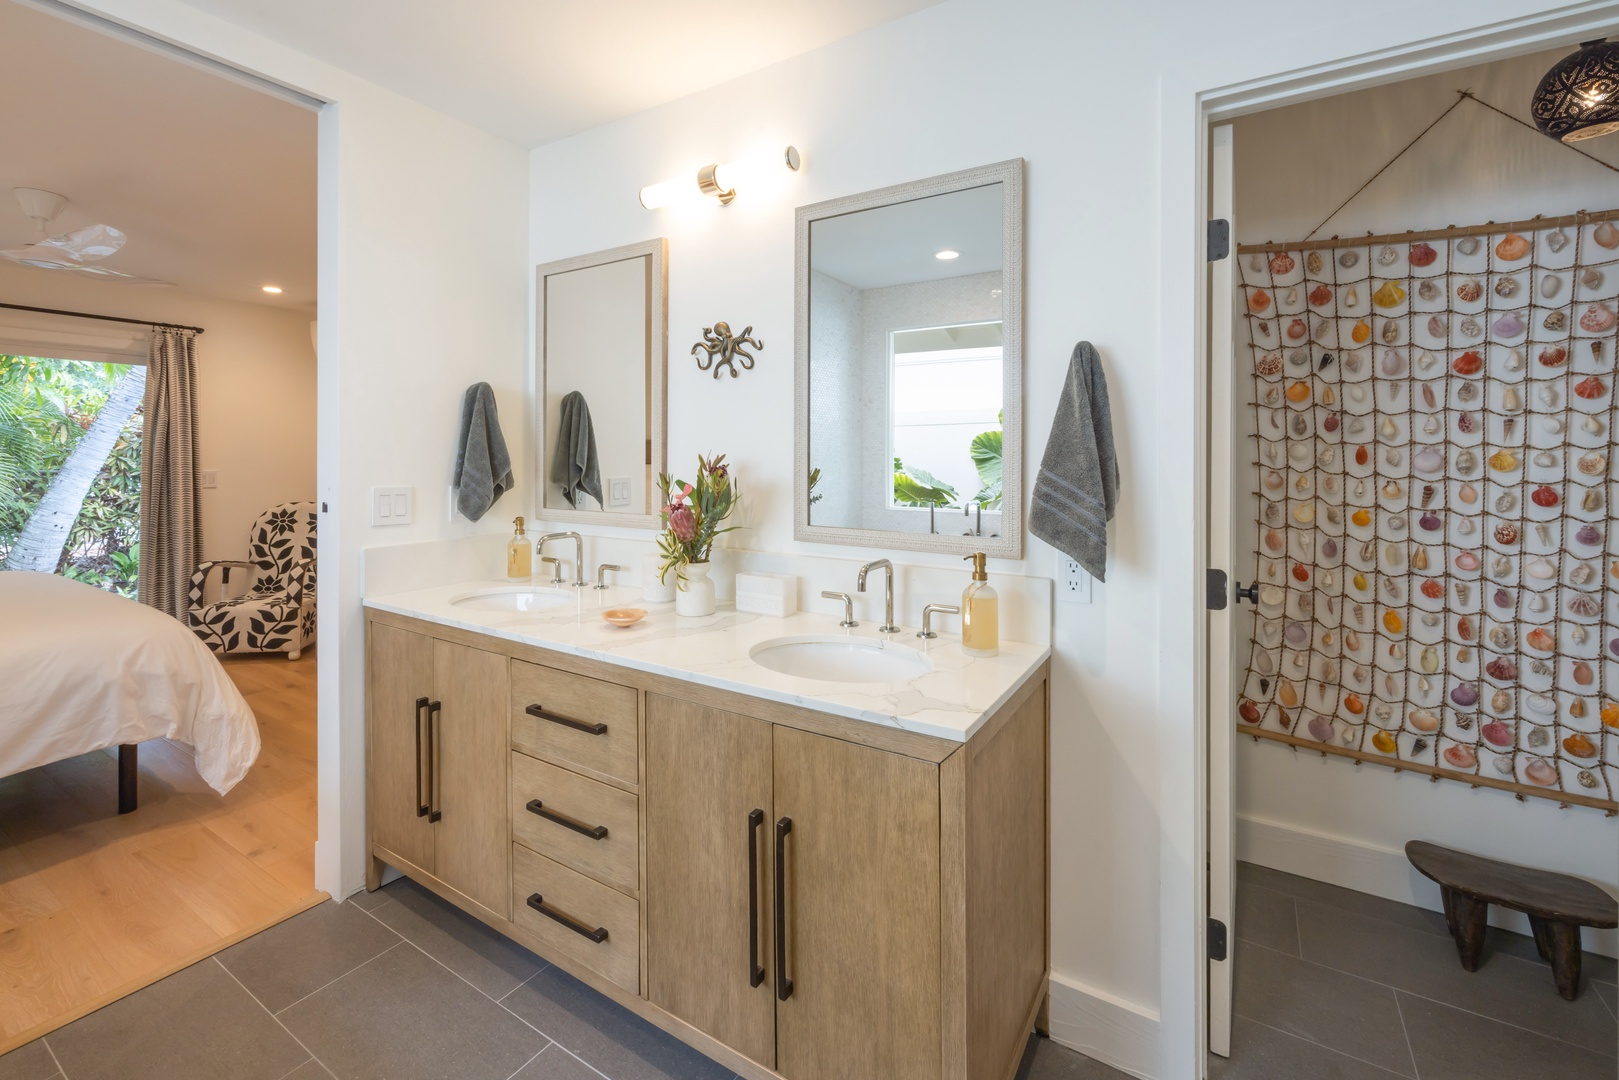 Kailua Vacation Rentals, Lanikai Ola Nani - Pamper yourself in the private bathroom, showcasing a dual sink setup, spacious walk-in closet, and a separate water closet.